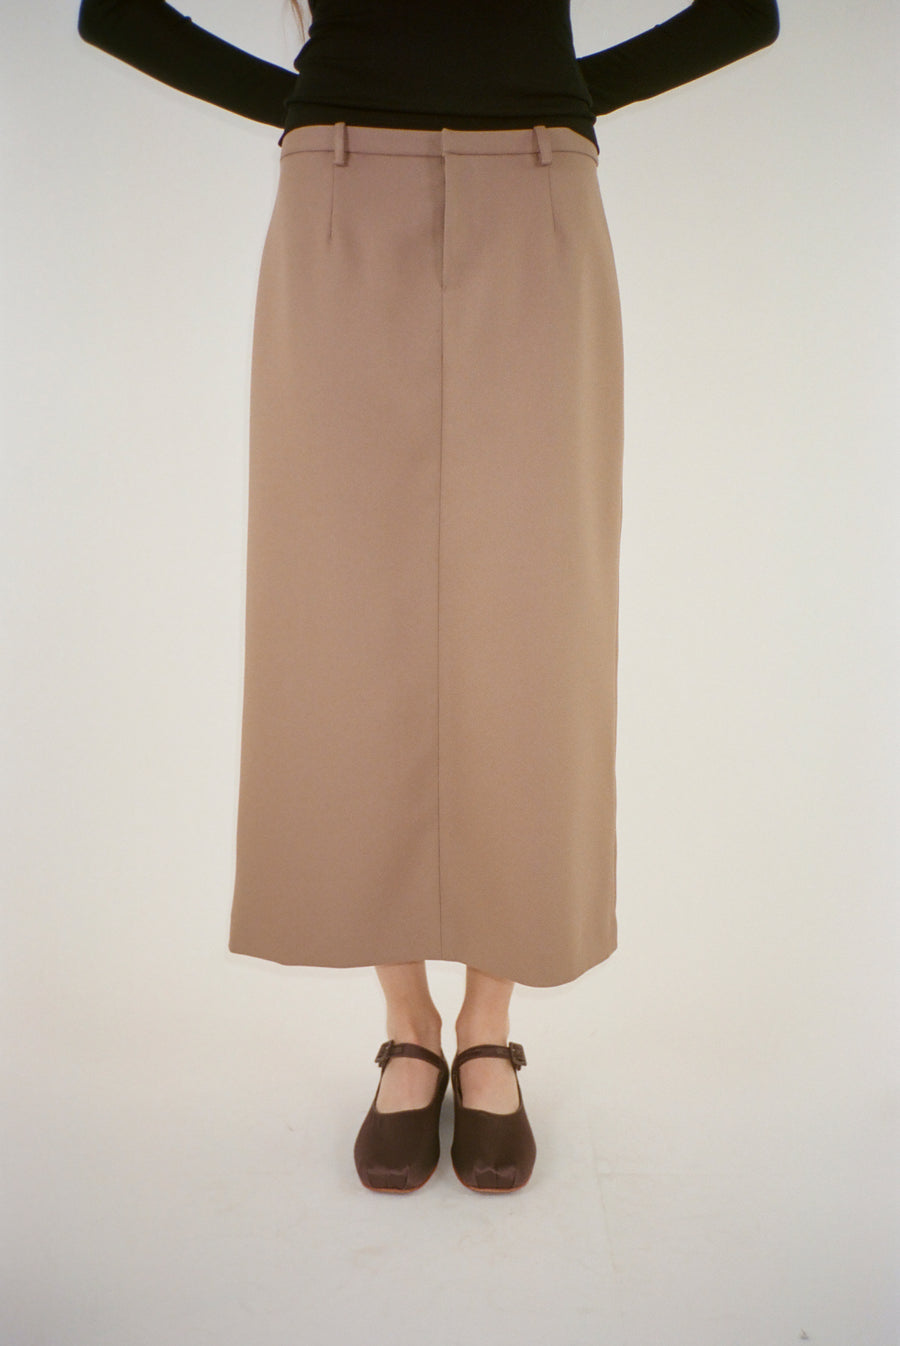 Midi length skirt in taupe suiting fabric on model